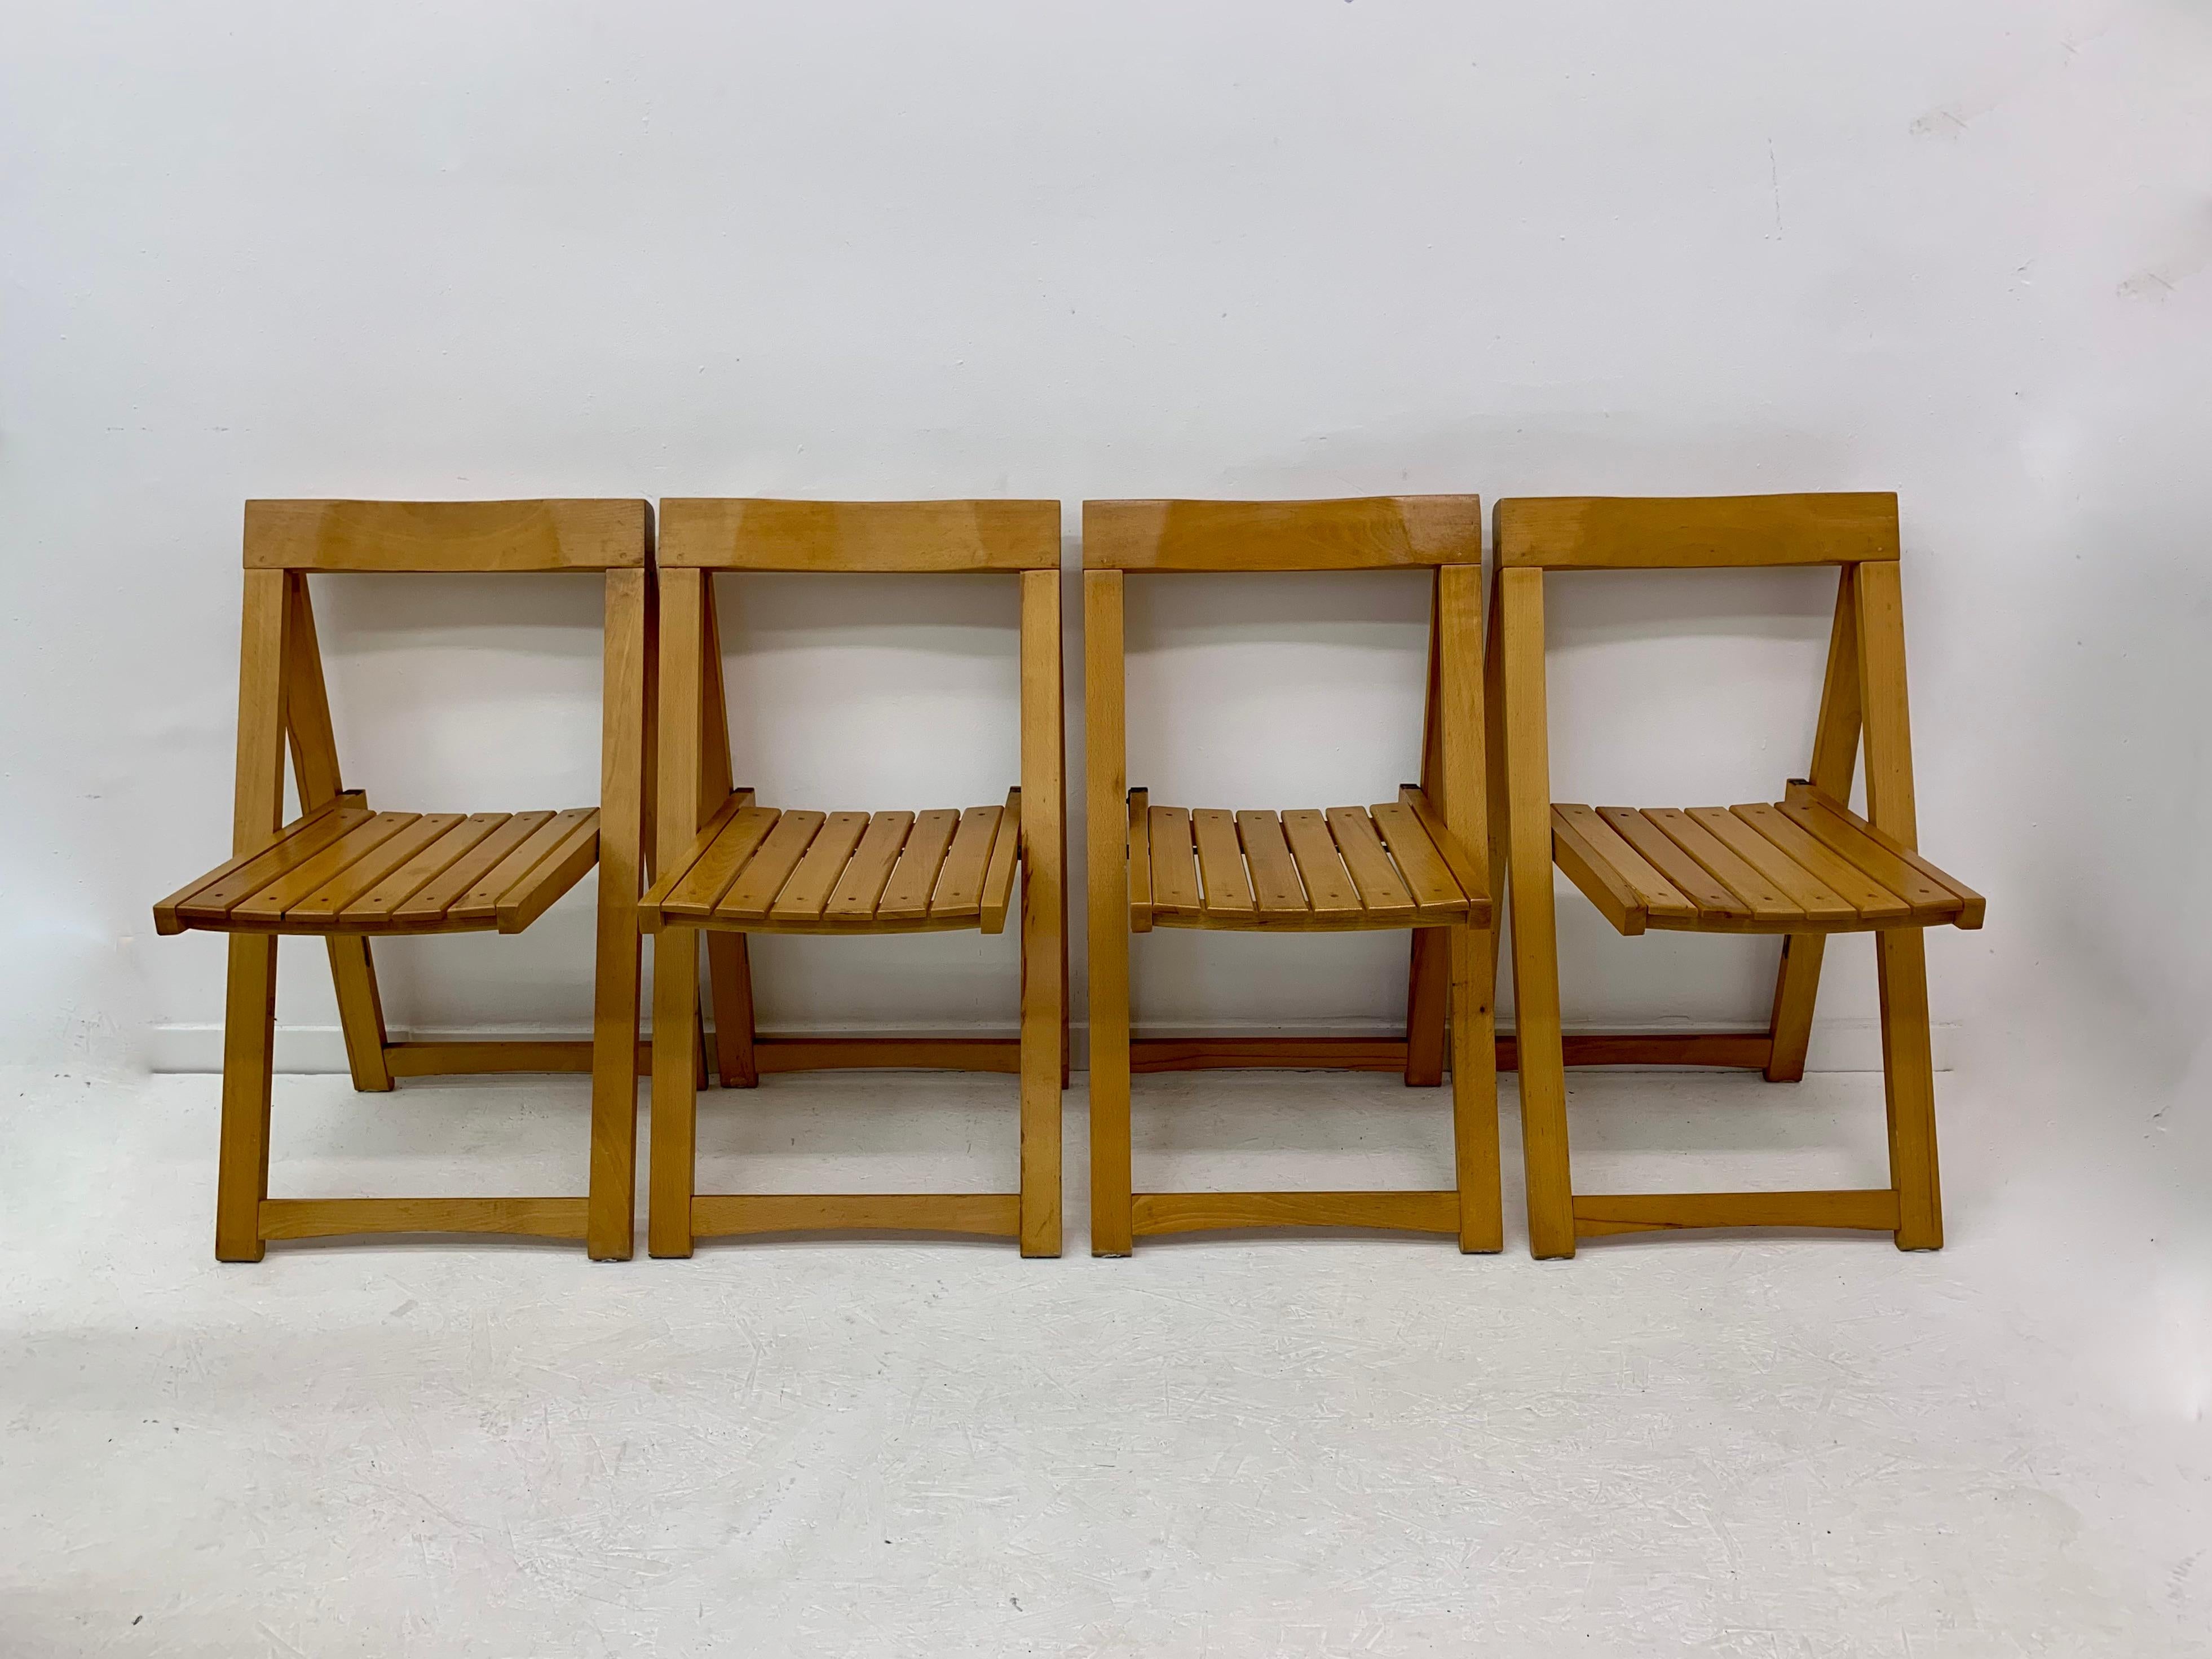 Wood Set of 4 Aldo Jacober for Alberto Bazzani folding chairs, 1960’s For Sale